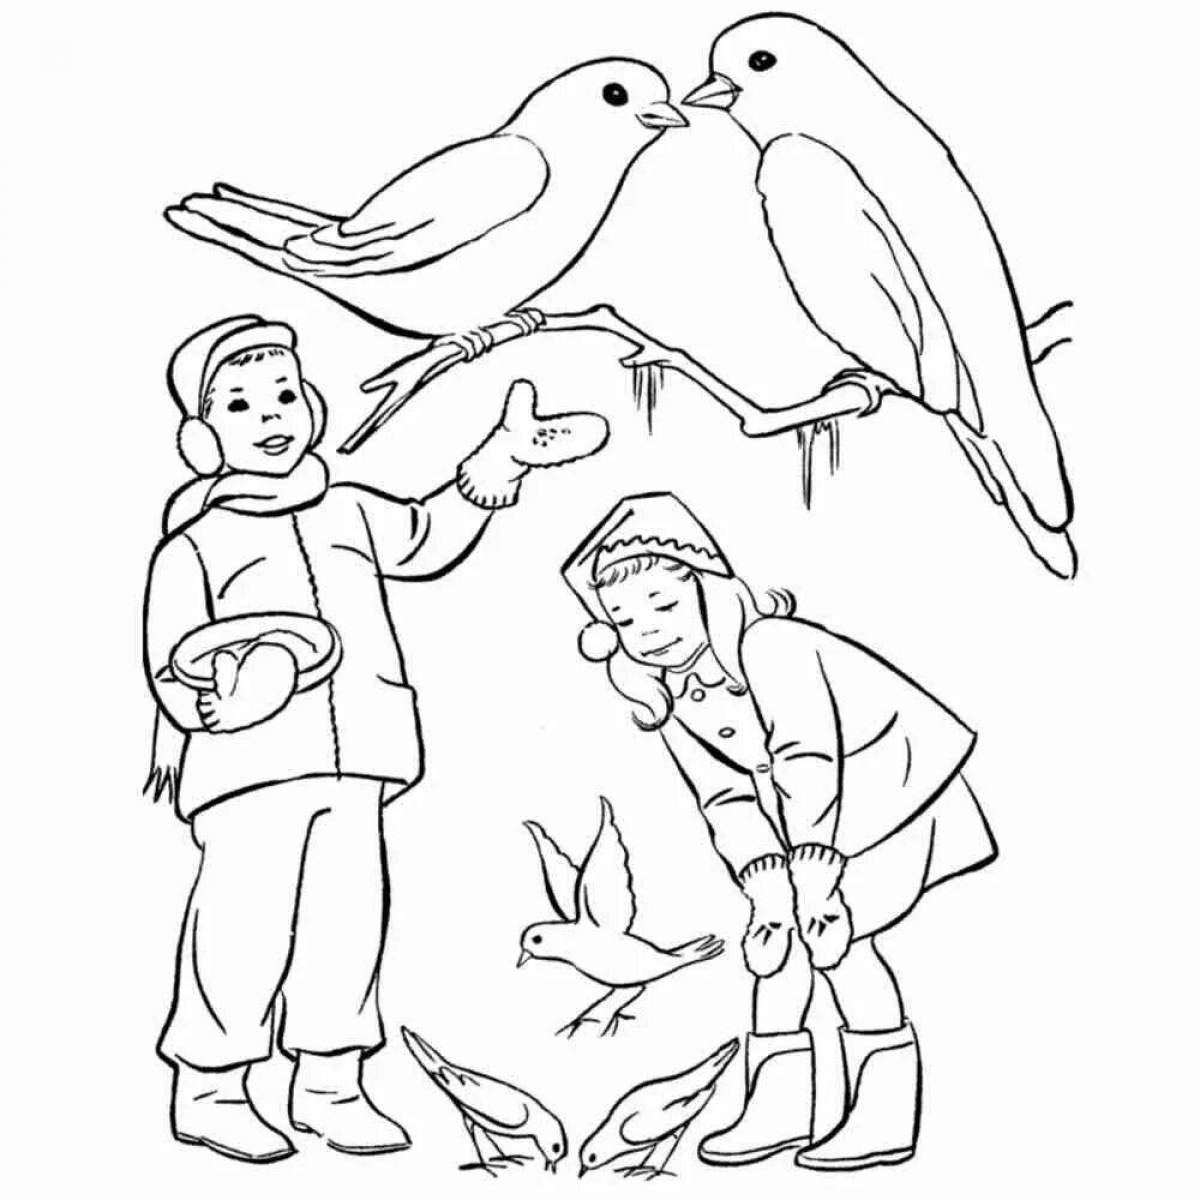 Coloring page splendorous feed the birds